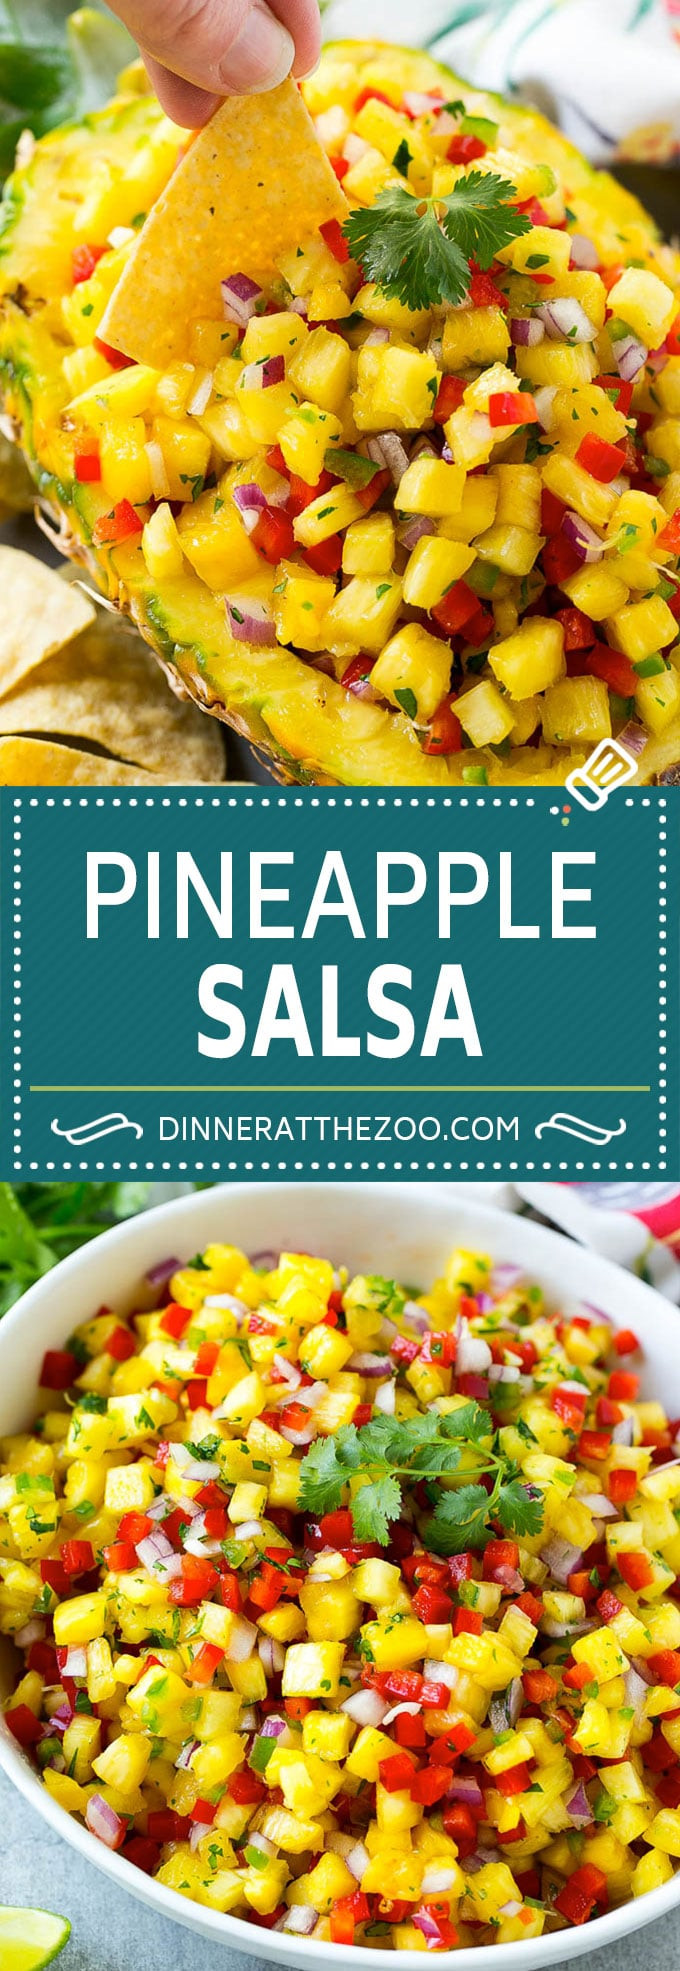 Pineapple Salsa Recipes
 Pineapple Salsa Dinner at the Zoo